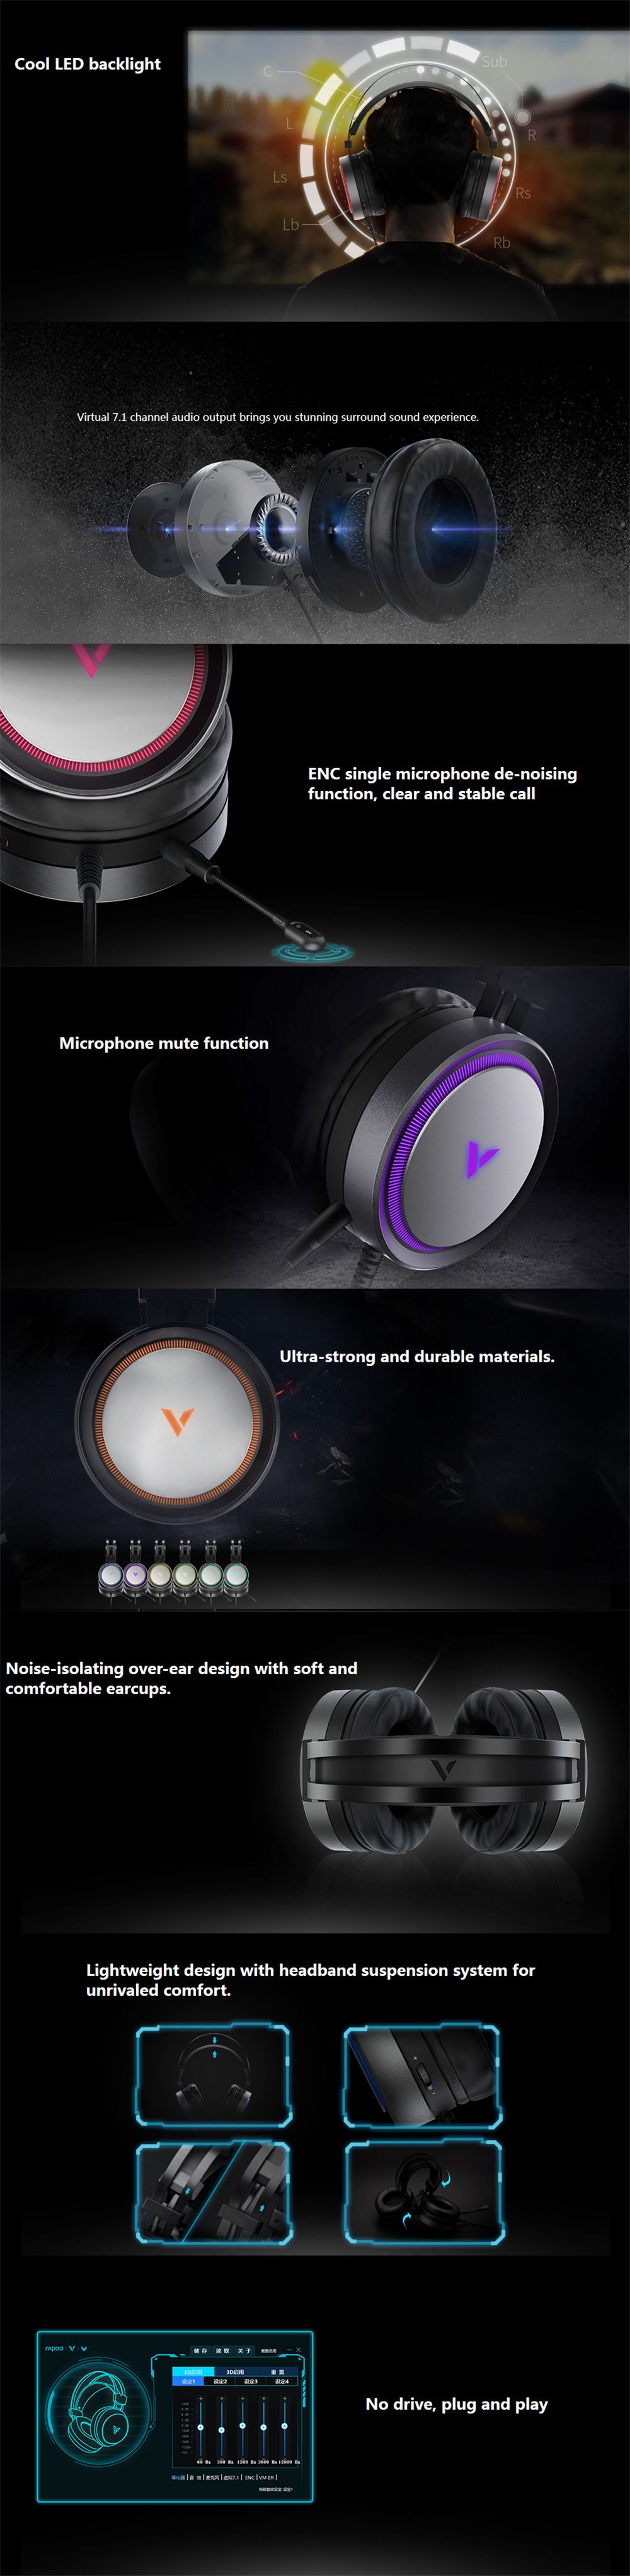 Rapoo-VH530-Gaming-Headset-71-Channel-USB-Surround-Sound-Breathing-LED-Backlight-Headphone-with-Micr-1474926